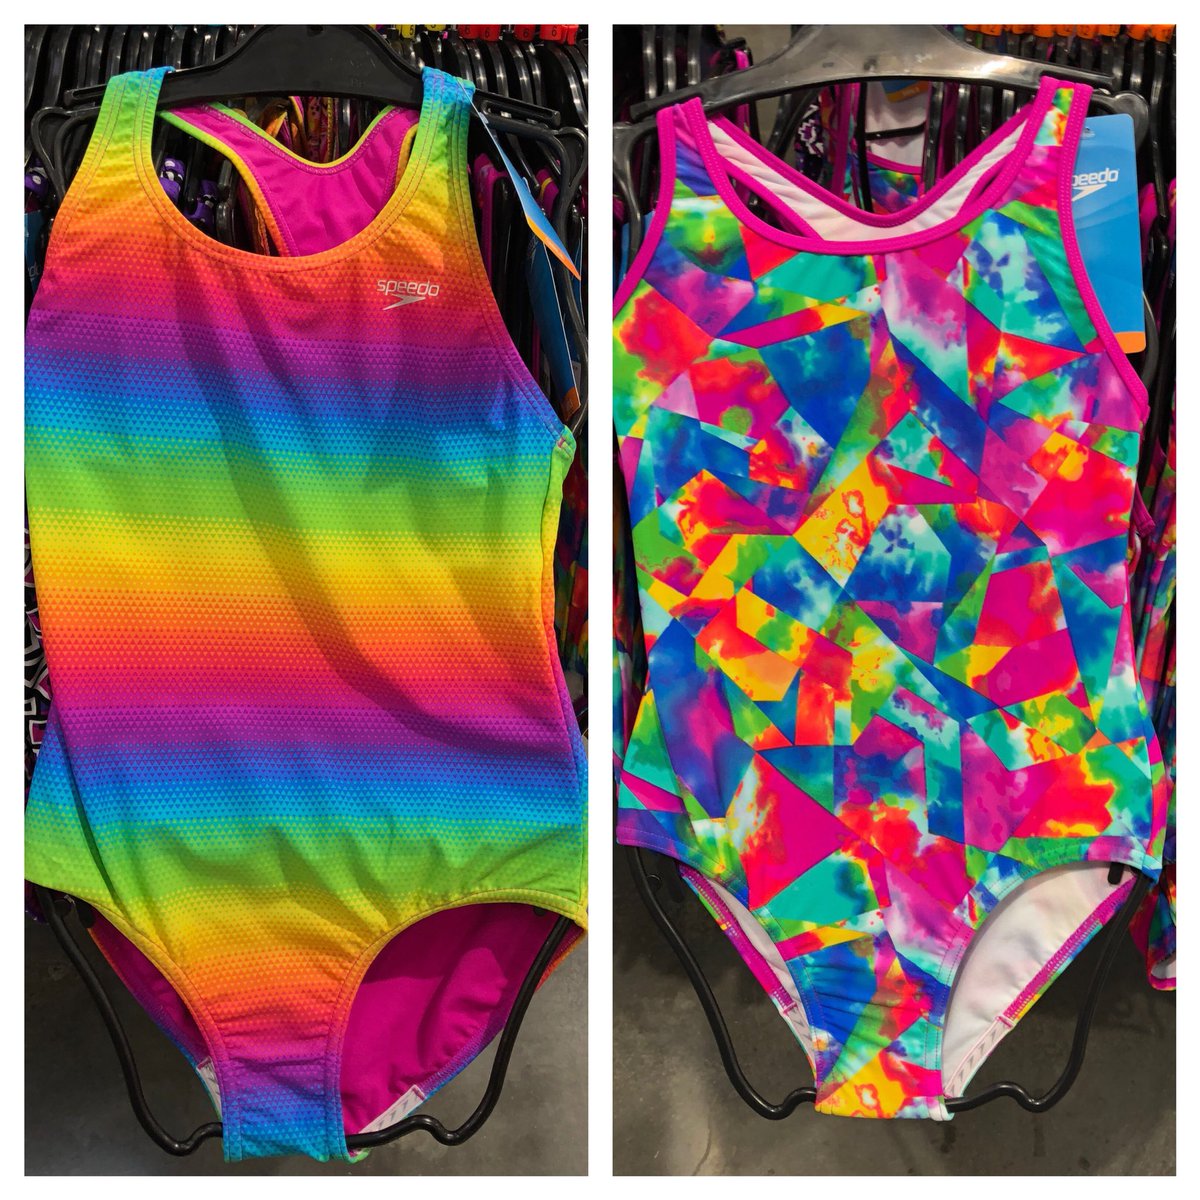 venster metro been theCostcoConnoisseur on Twitter: "#DC may be bracing for wintery precip,  but these @SpeedoUSA girls swimsuits have me dreaming of summer! Item  #323027 $12.49 #costco #speedo #costcokids #costcoclothes #girlsclothes  #kidsclothes #beach #pool #summer #